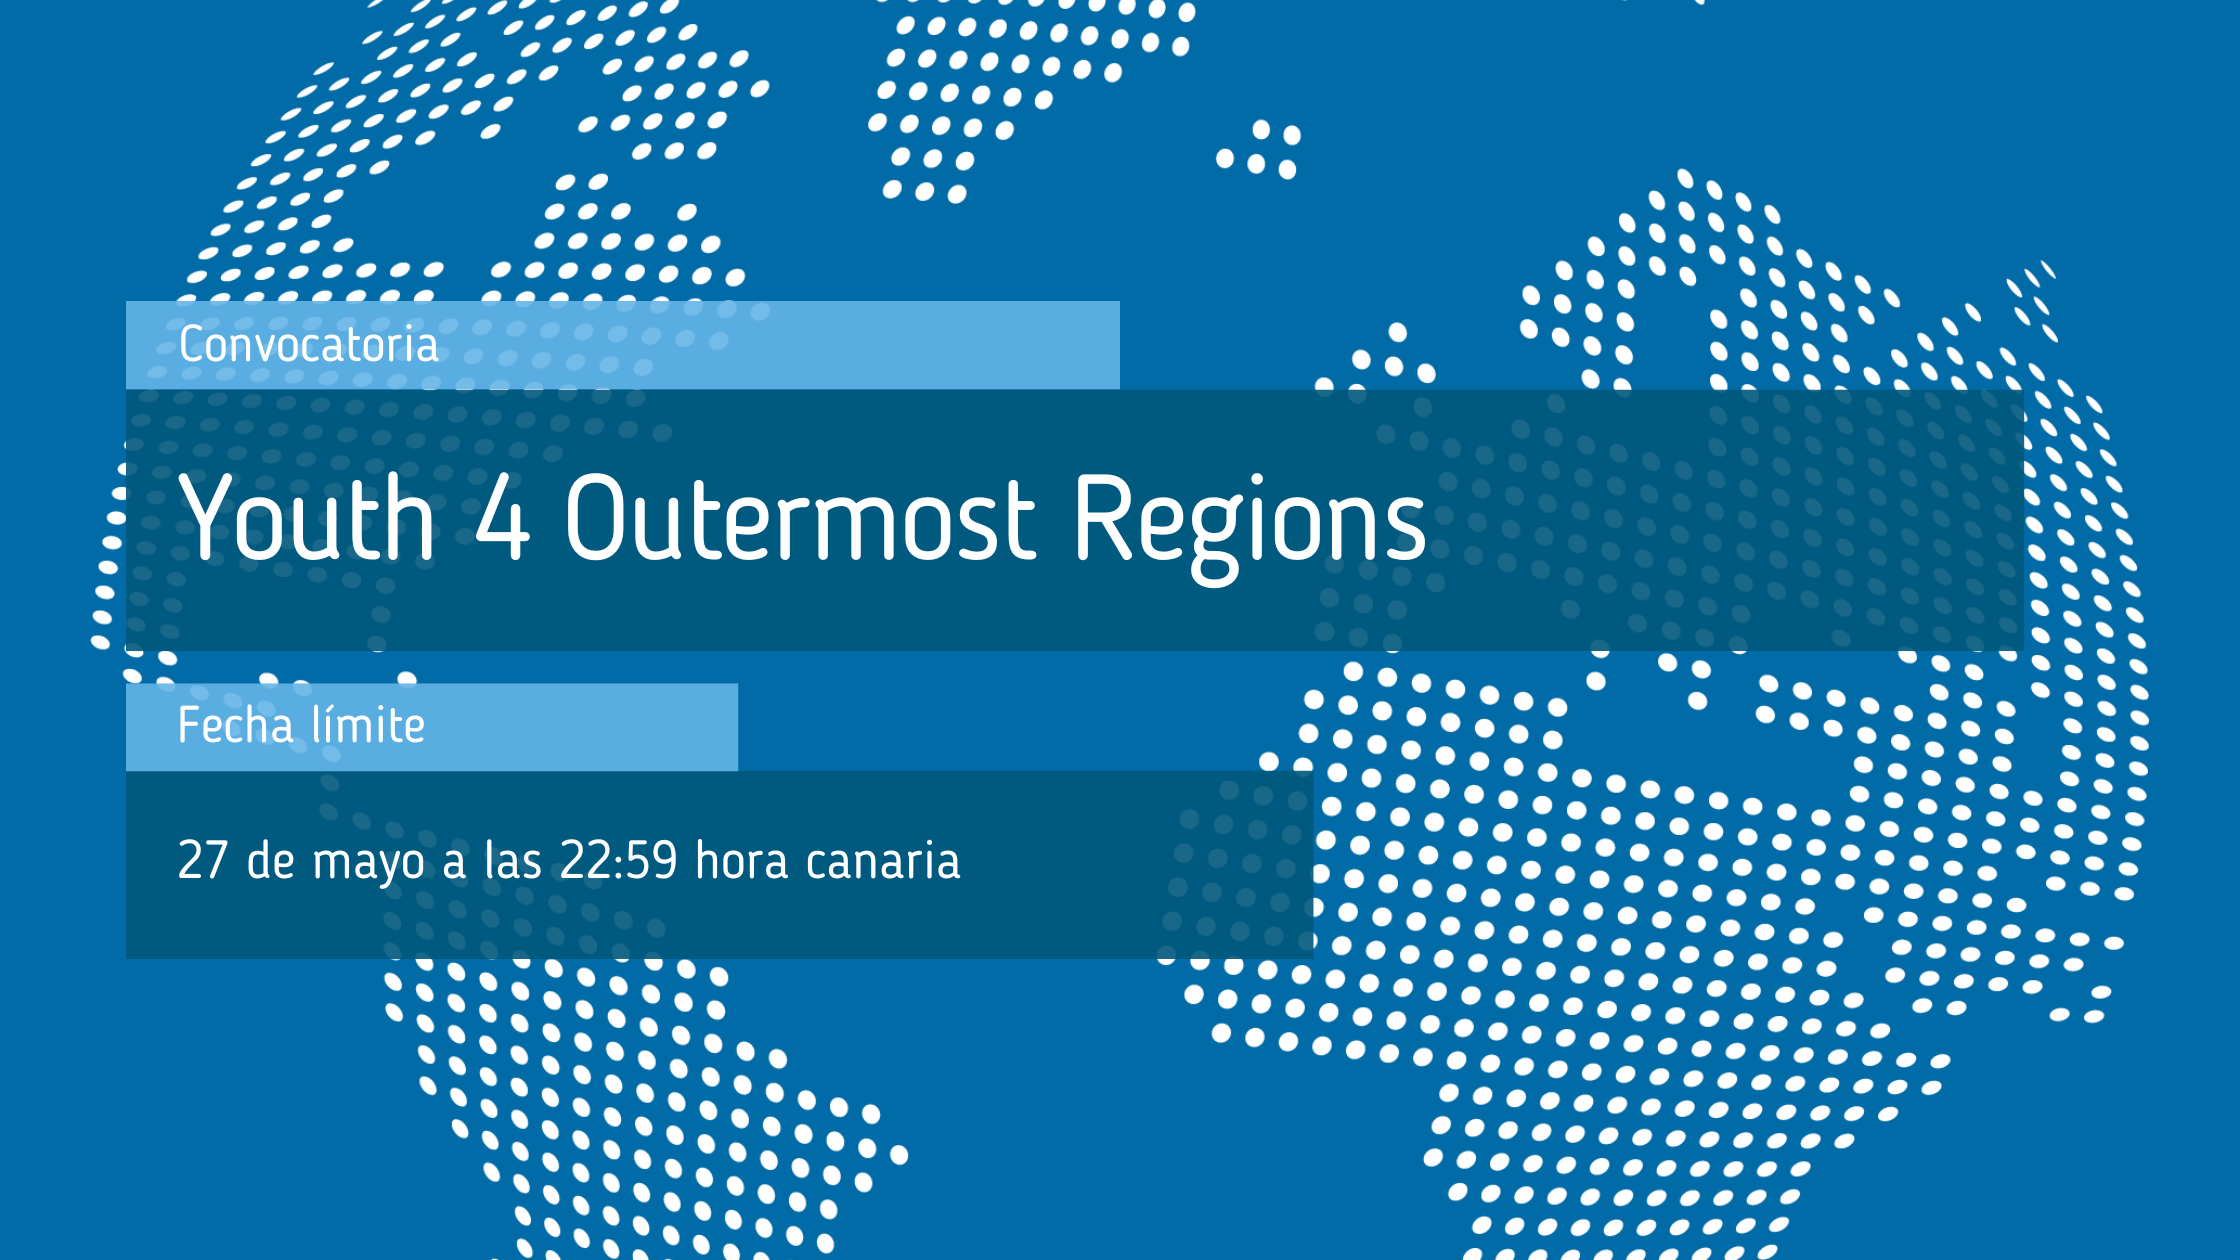 Convocatoria_Youth_4_Outermost_Regions